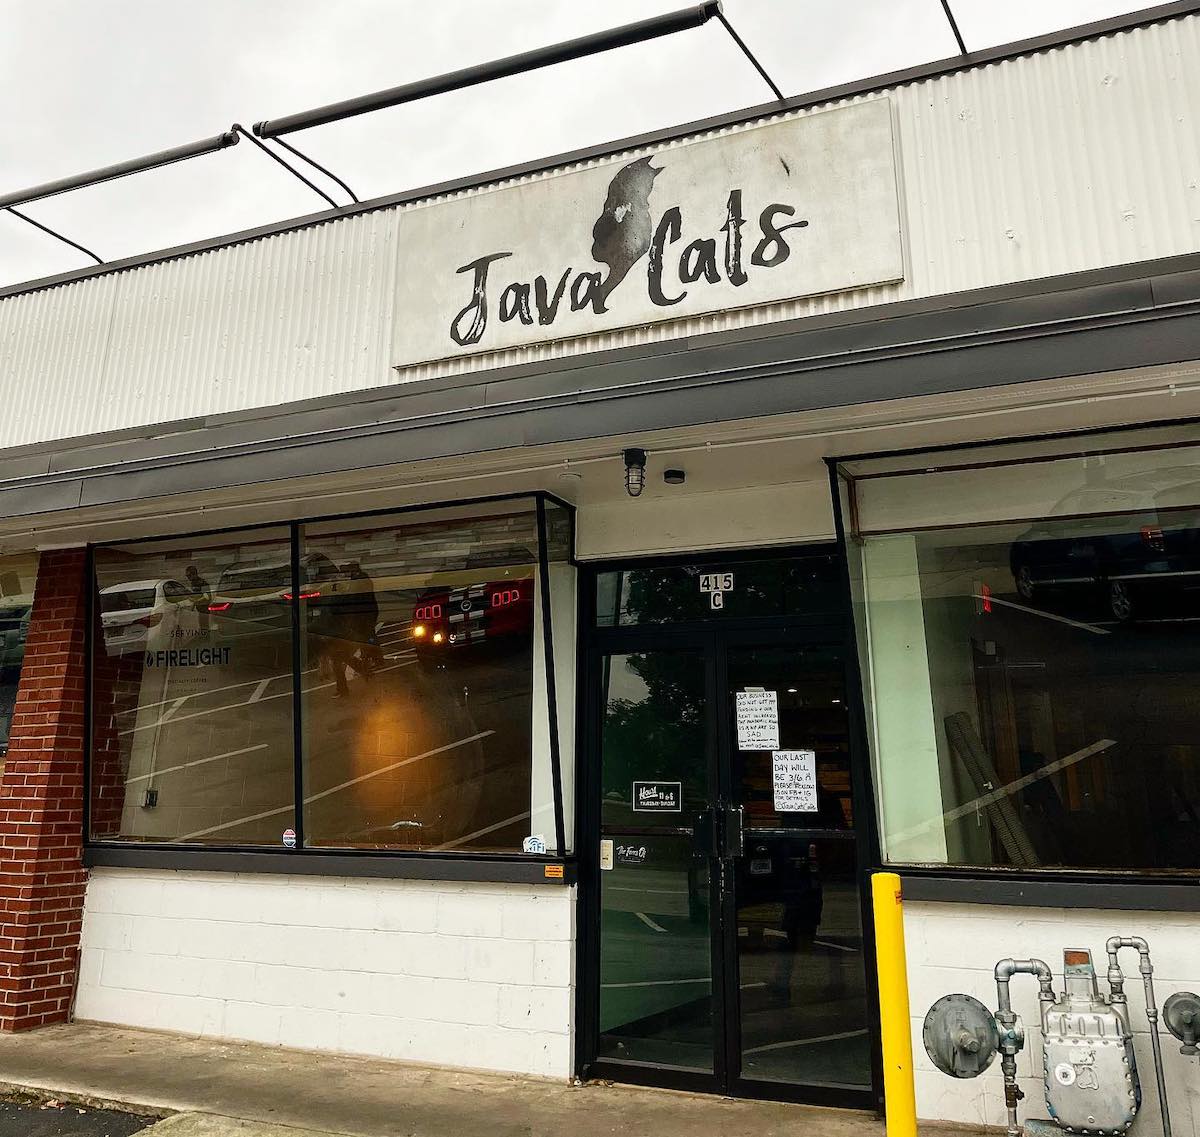 Java Cats Shutters Its Memorial Drive Cat Cafe